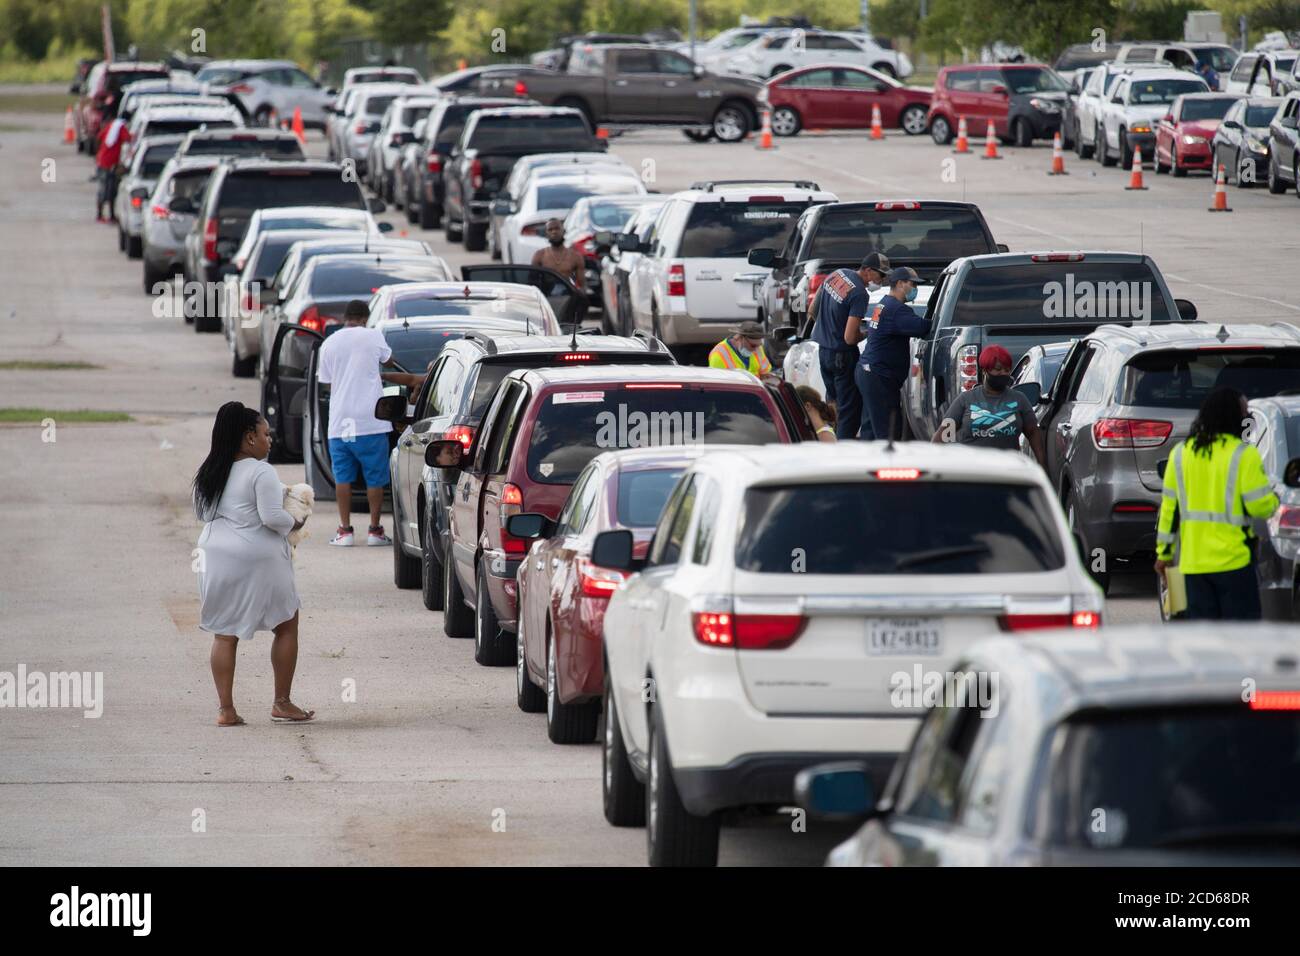 Austin, TX USA August 26, 2020: Hundreds of cars from coastal east Texas and southwest Louisiana wait in line at a Hurricane Laura evacuation center set up by Austin officials at the Circuit of the Americas race track parking areas. Early-arriving drivers received vouchers for hotel rooms. Once those ran out, drivers were directed to other evacuation centers in Waco and Dallas. Laura is expected to make landfall overnight as a Category 4 storm and wreak havoc along the Texas and Louisiana coasts and inland. Credit: Bob Daemmrich/Alamy Live News Stock Photo